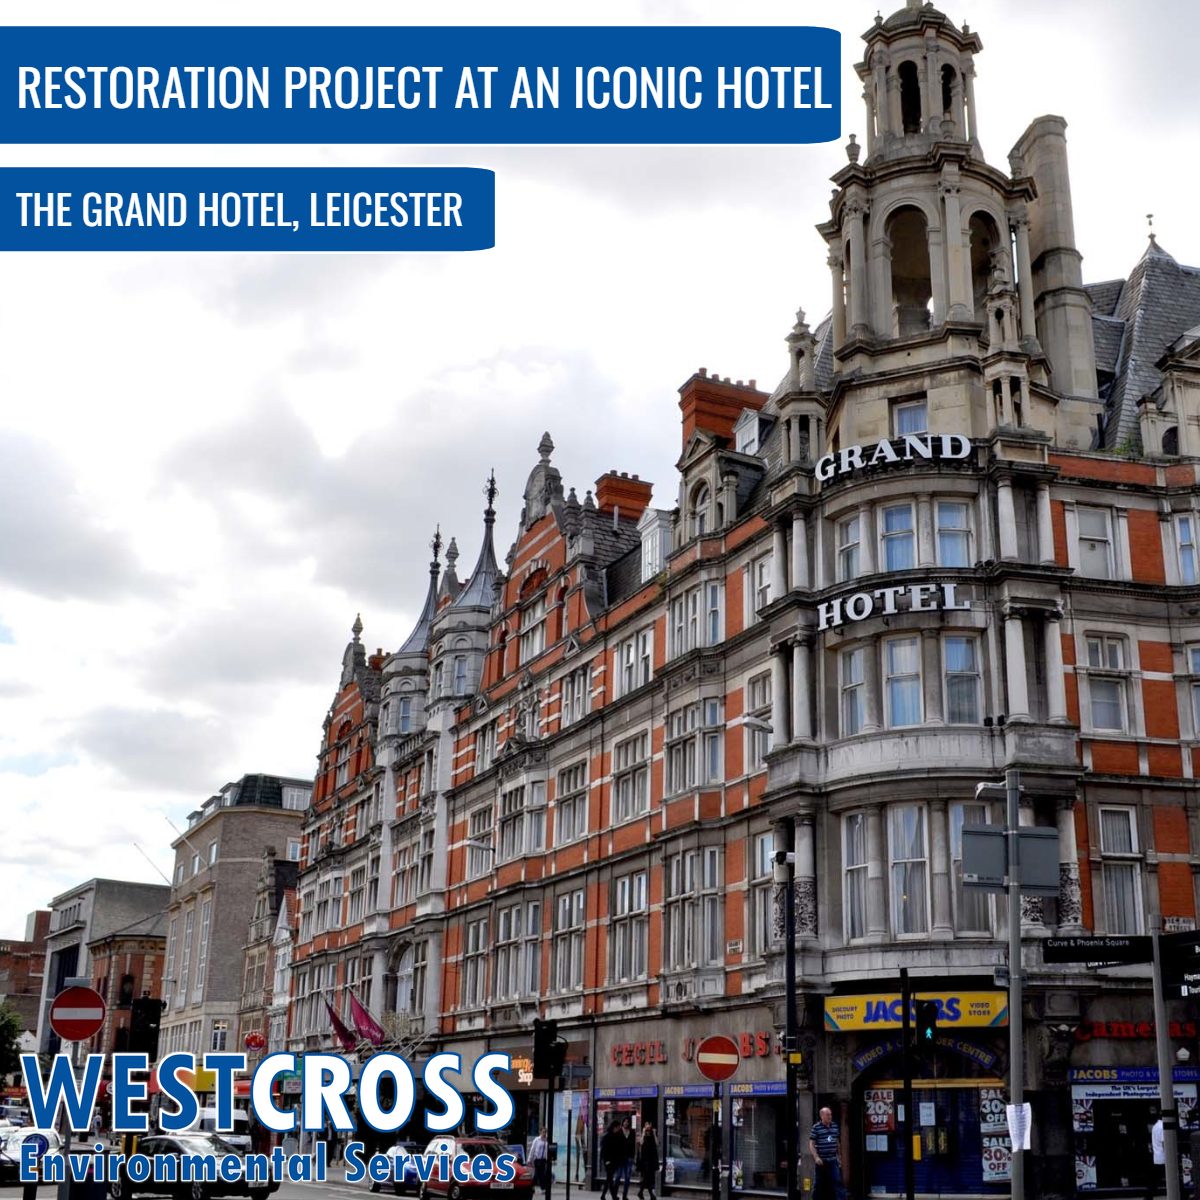 Supporting Grand Hotel Leicester Restoration Project with the removal of asbestos on the site